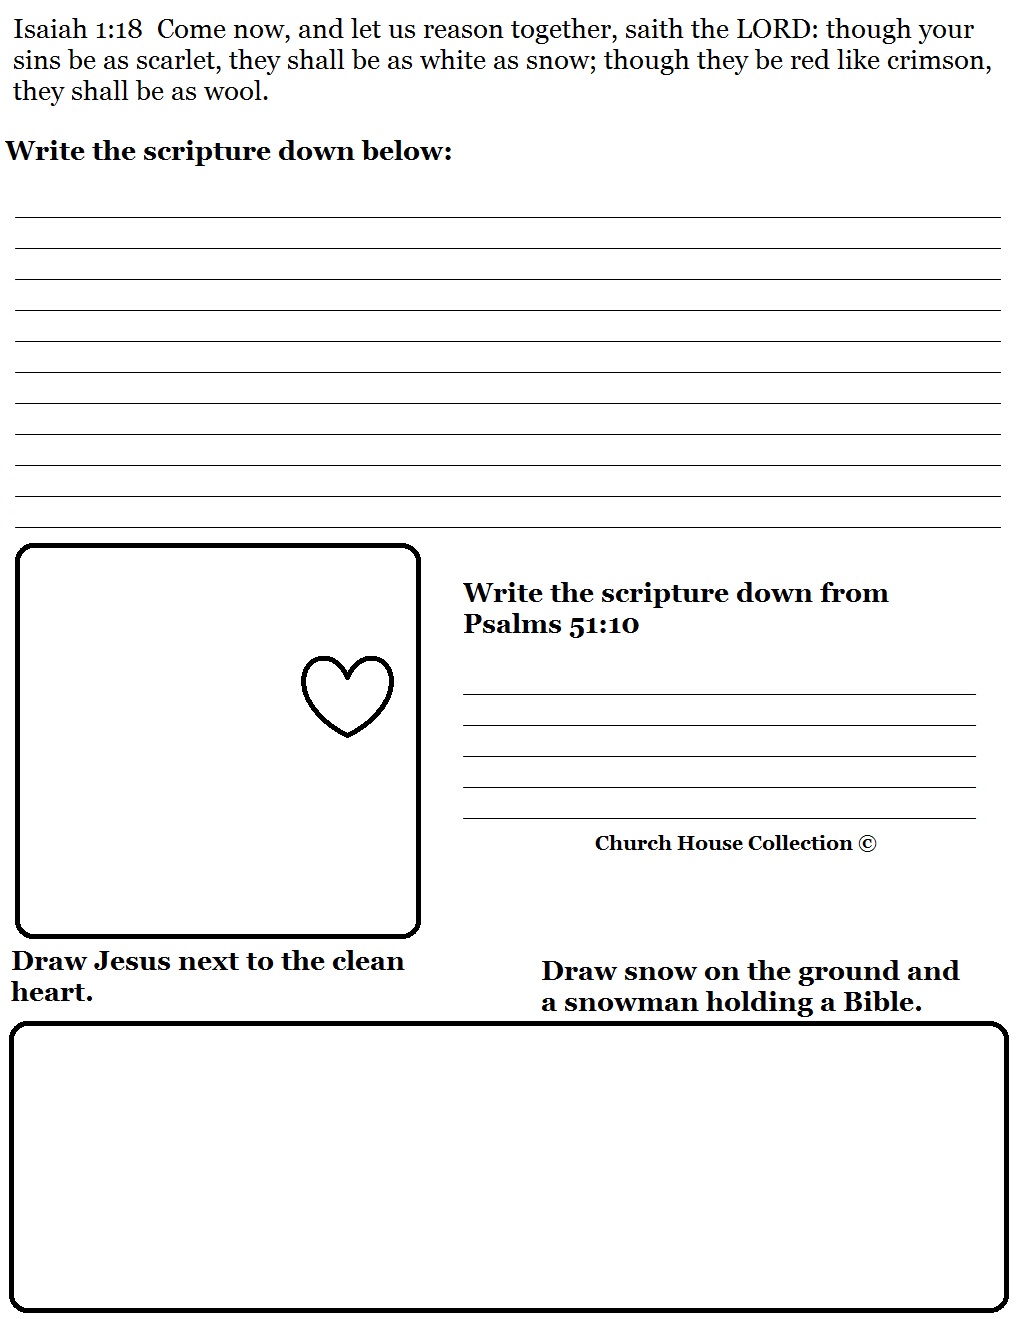 Free Christmas Snowman Activity Page Worksheet Printable Template For Kids in Sunday School by Church House Collection. Use with our Free Christmas Sunday school Lessons. Draw snow and a snowman holding a bible. Look up the scirpture from Psalms 51:10 and write it down. Fun Christmas church worksheets for preschool kids or toddlers.